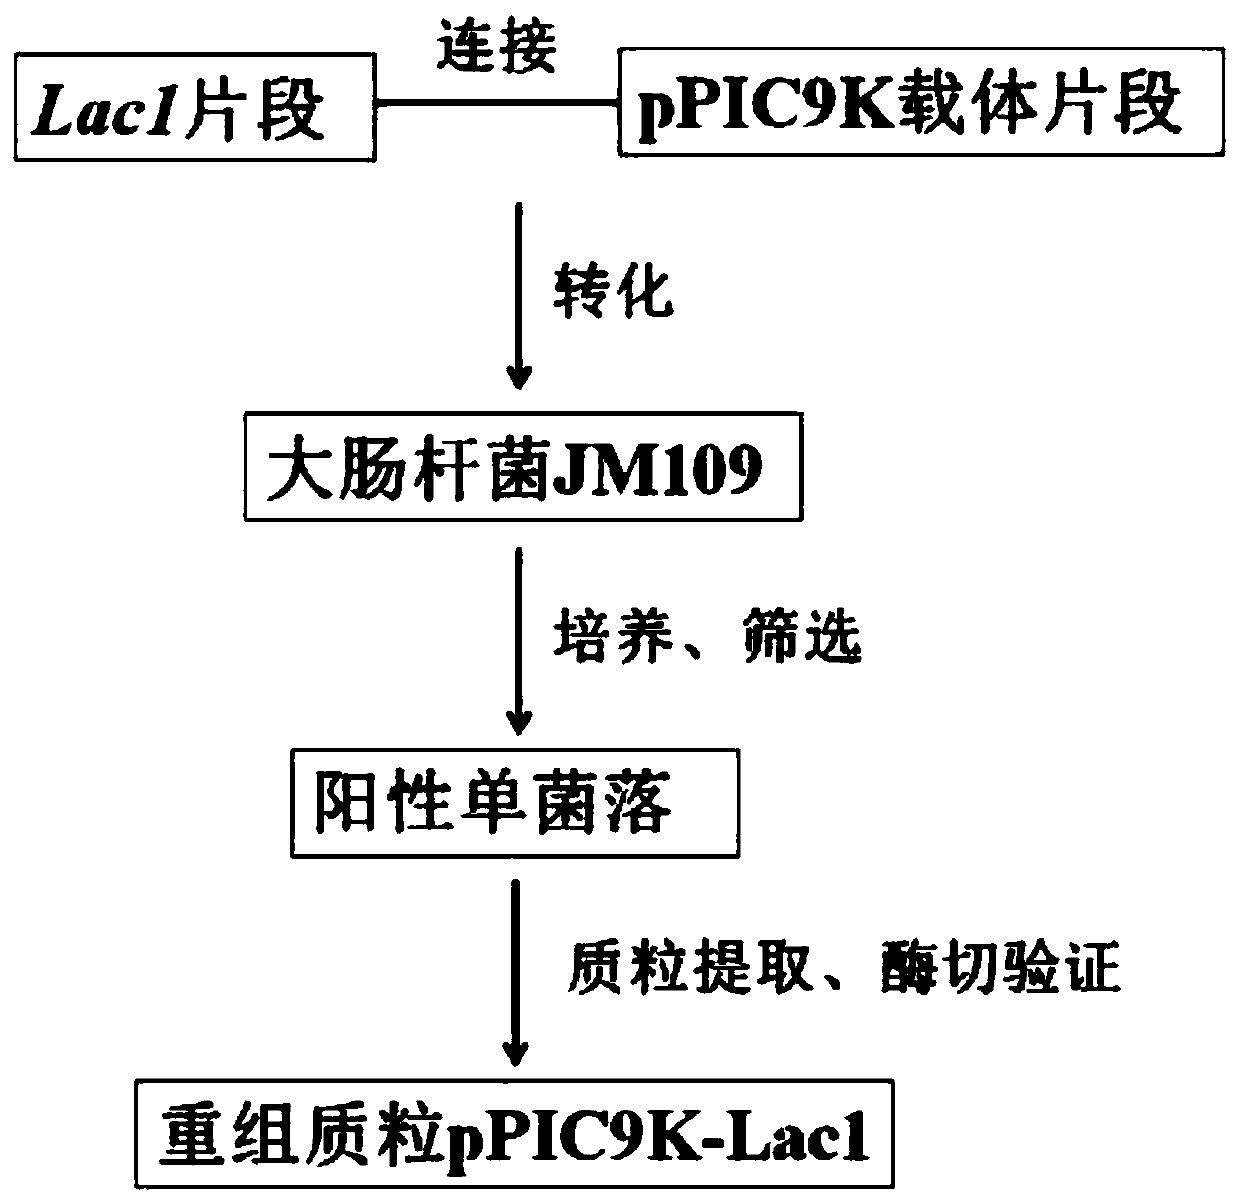 Preparation method and application of recombinant fungal laccase